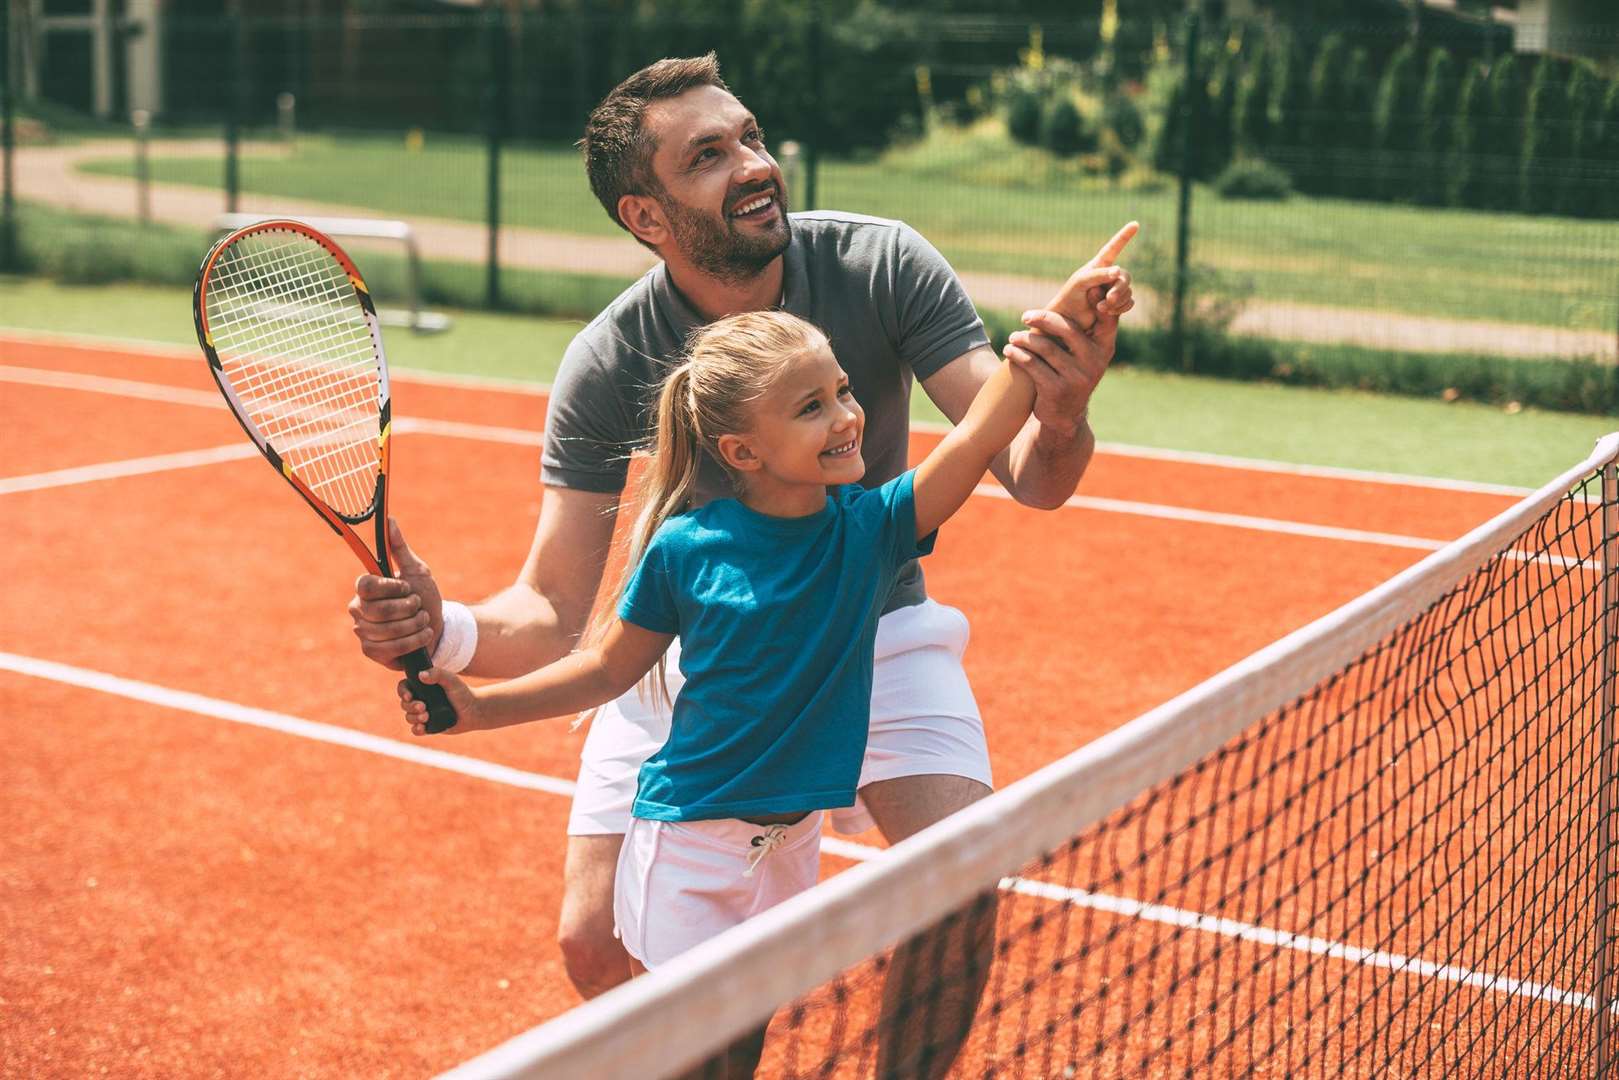 Tennis is the perfect way to encourage children to be active outside and have fun